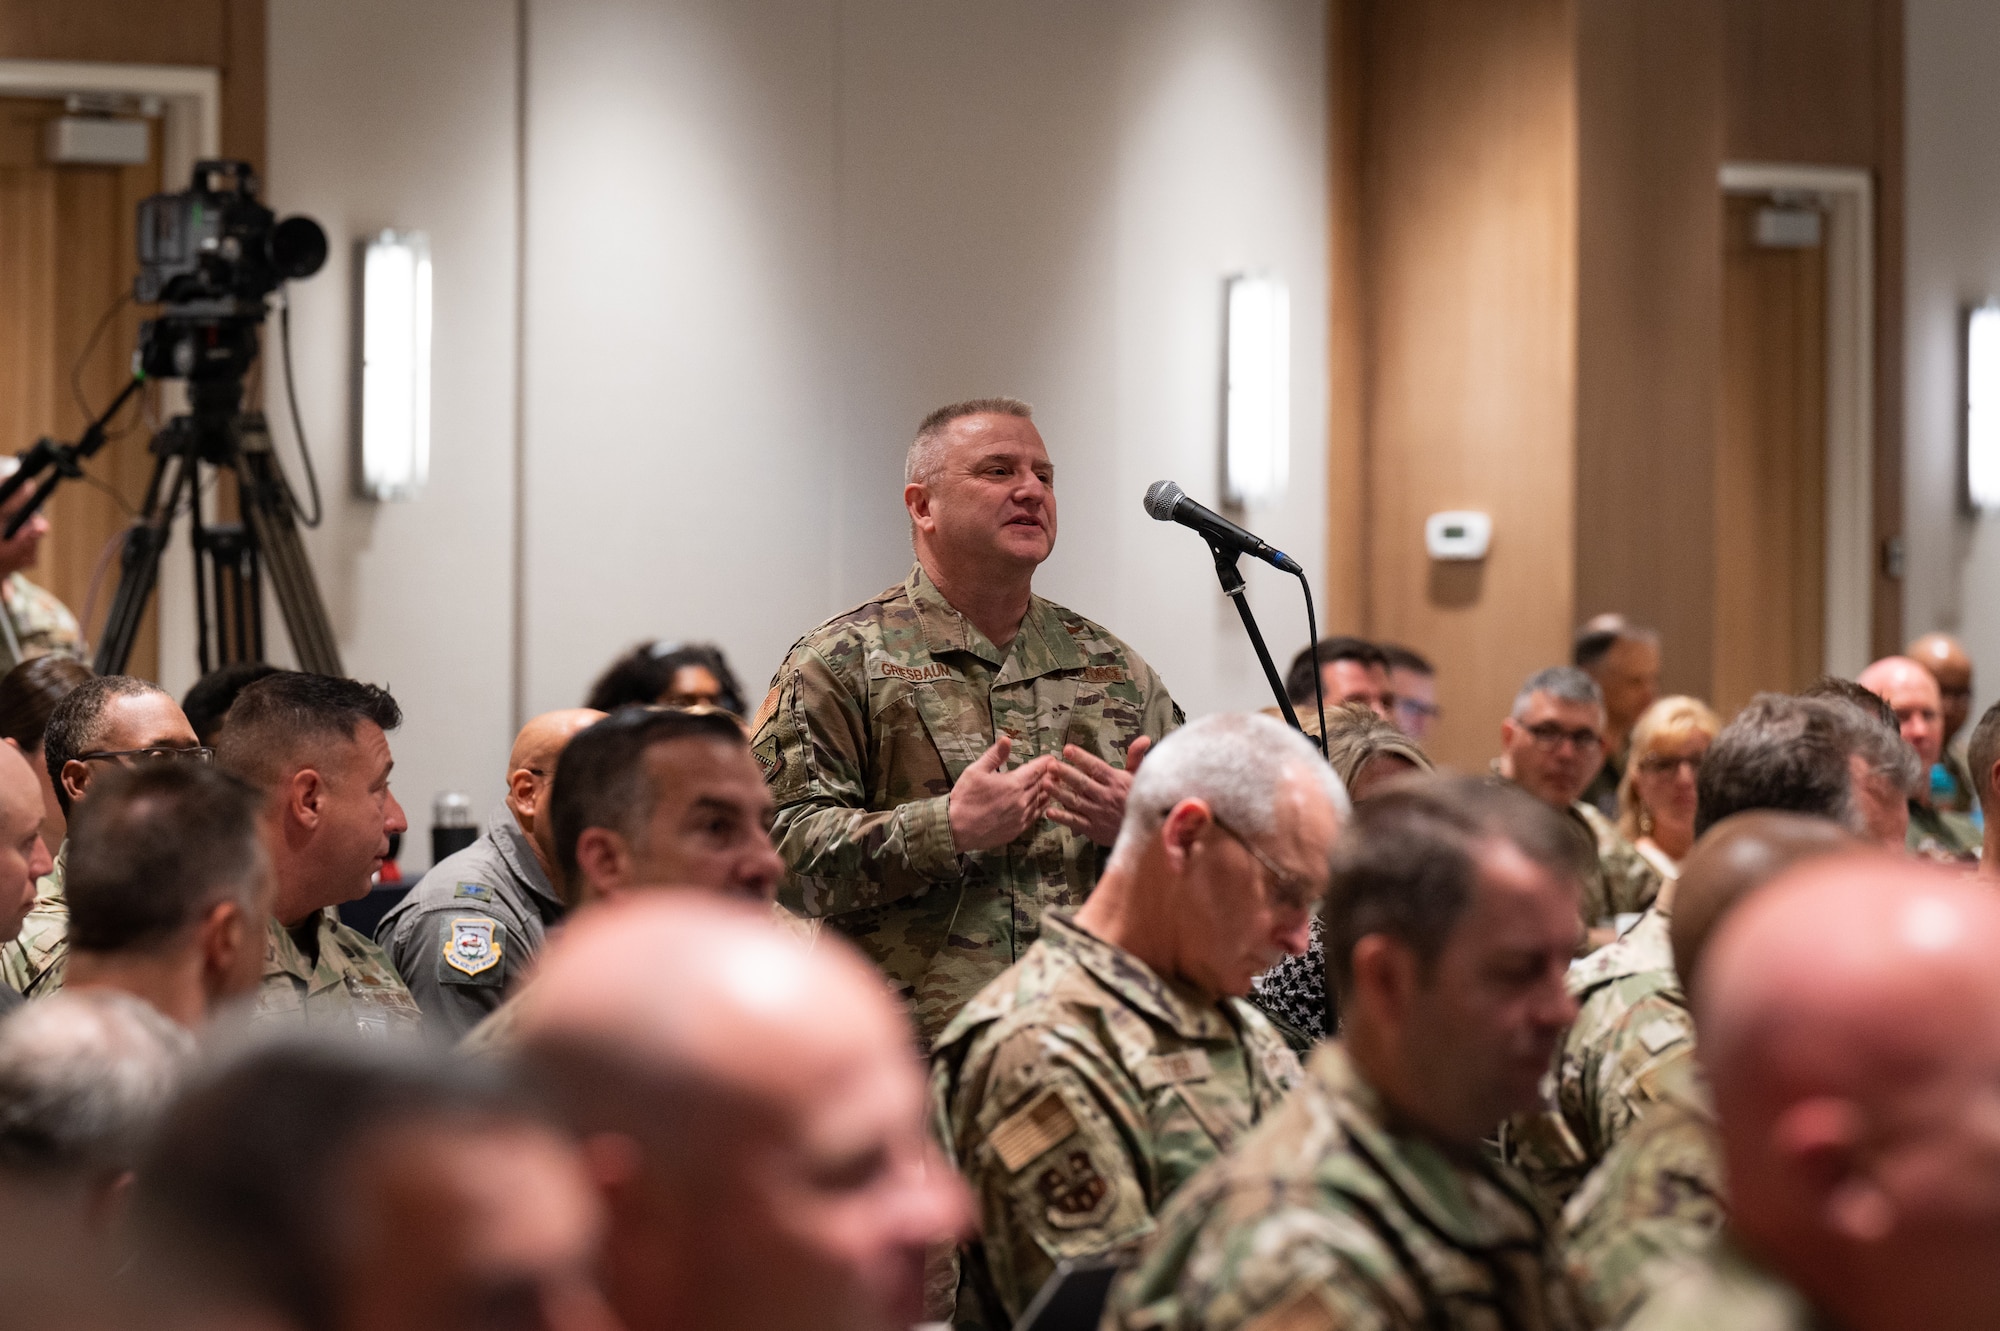 U.S. Air Force Col. Michael Griesbaum, commander, 168th Wing, poses a question for U.S. Army Gen. Daniel Hokanson, chief, National Guard Bureau, during the 2023 Wing Leader Conference in Newport Beach, California, April 26, 2023.